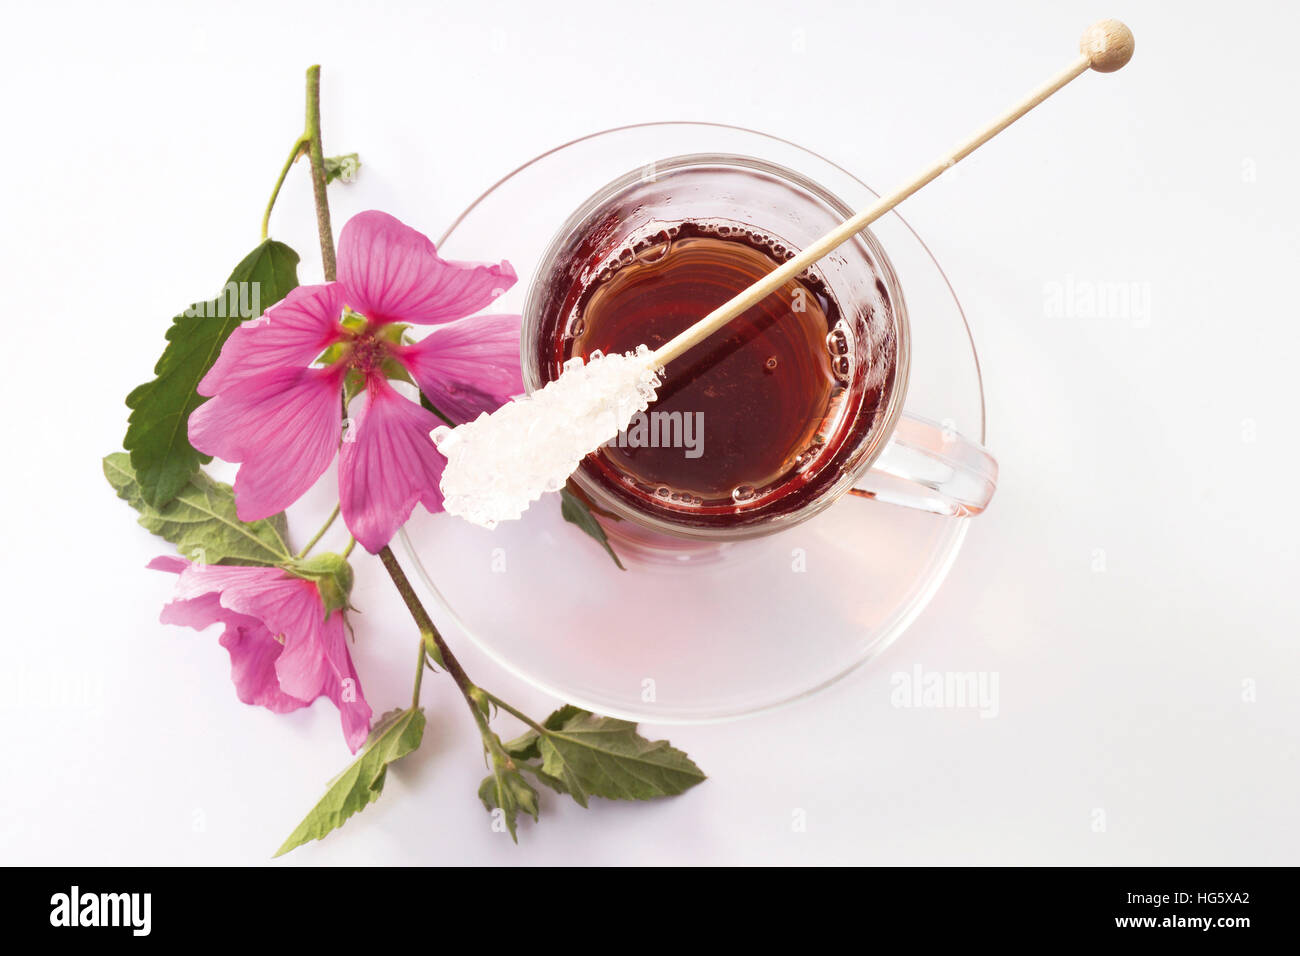 Mallow tea garnished with rock candy and mallow blossoms Stock Photo